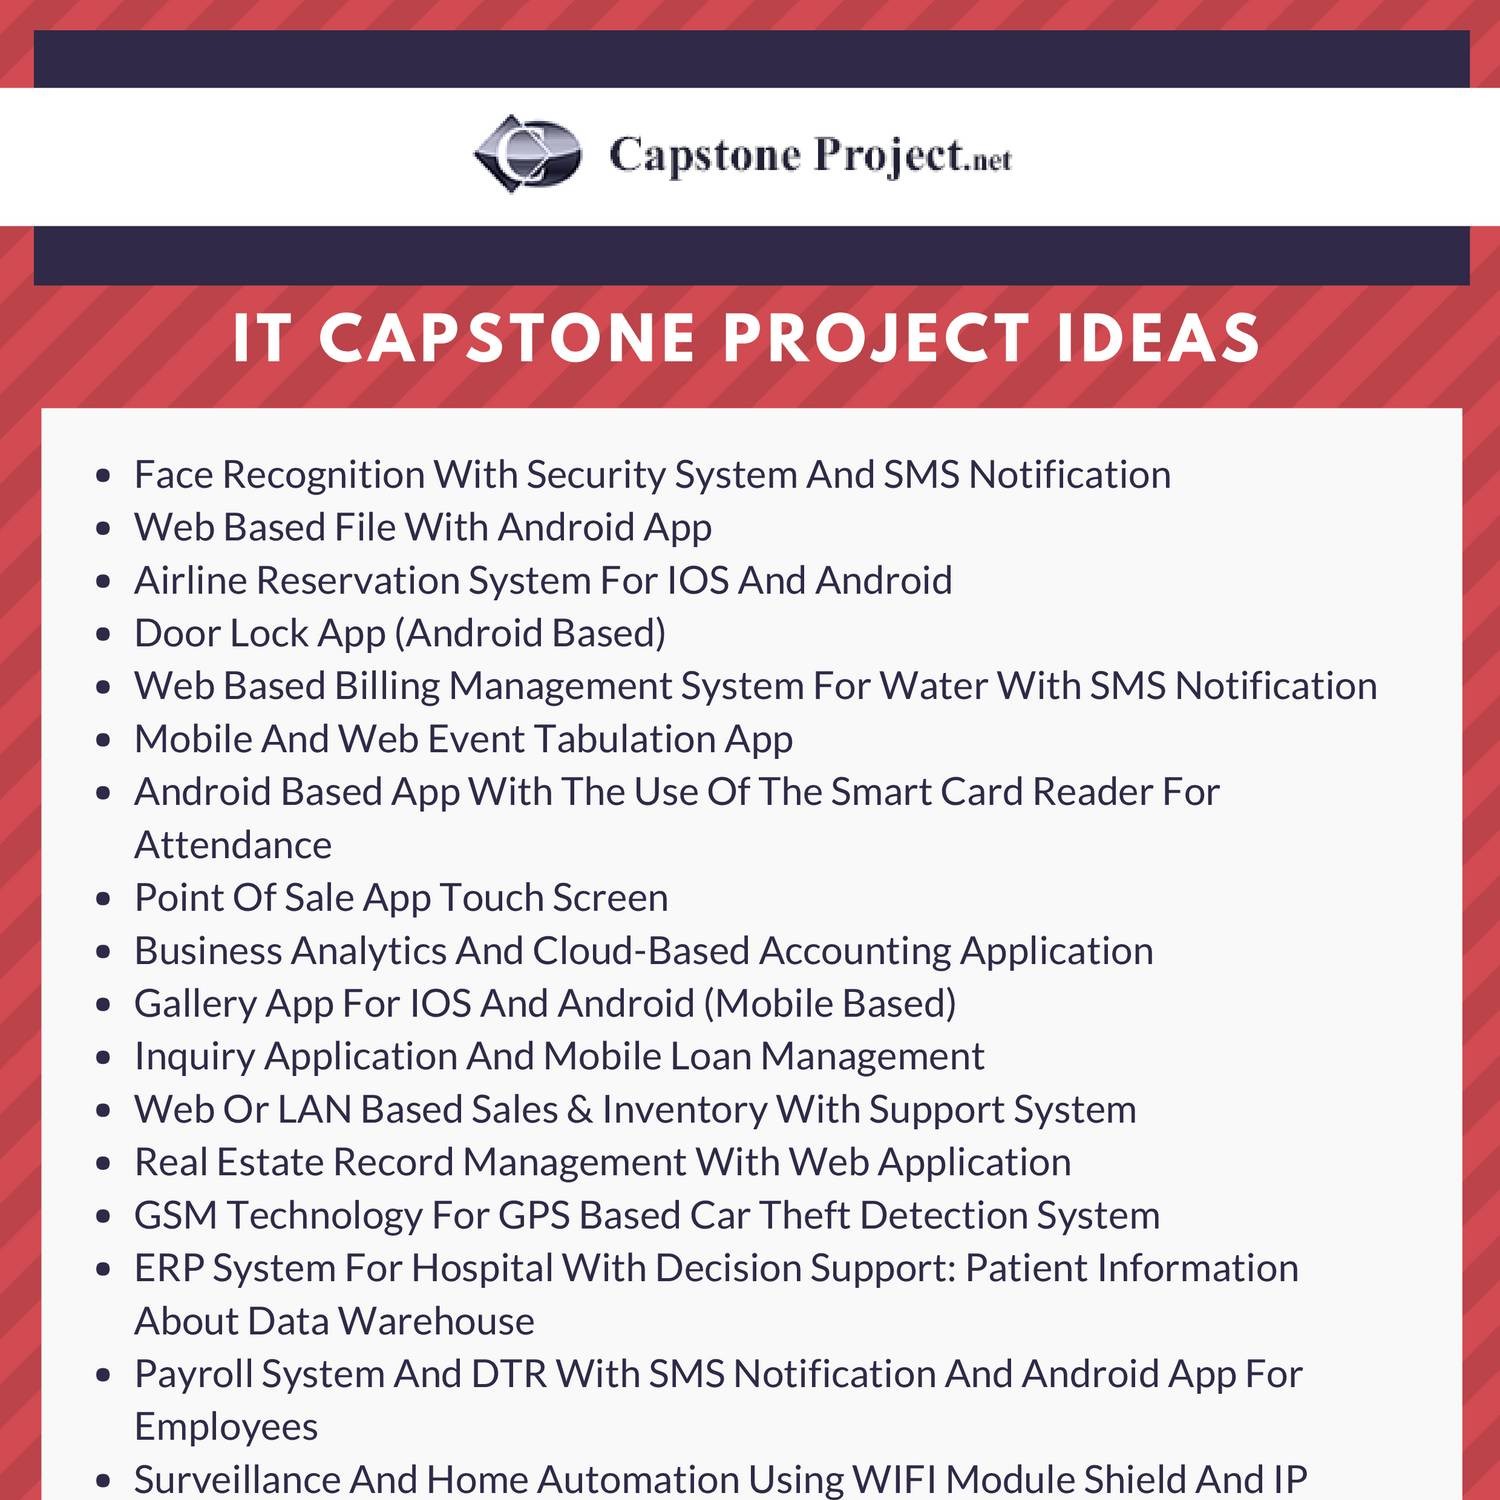 capstone research project